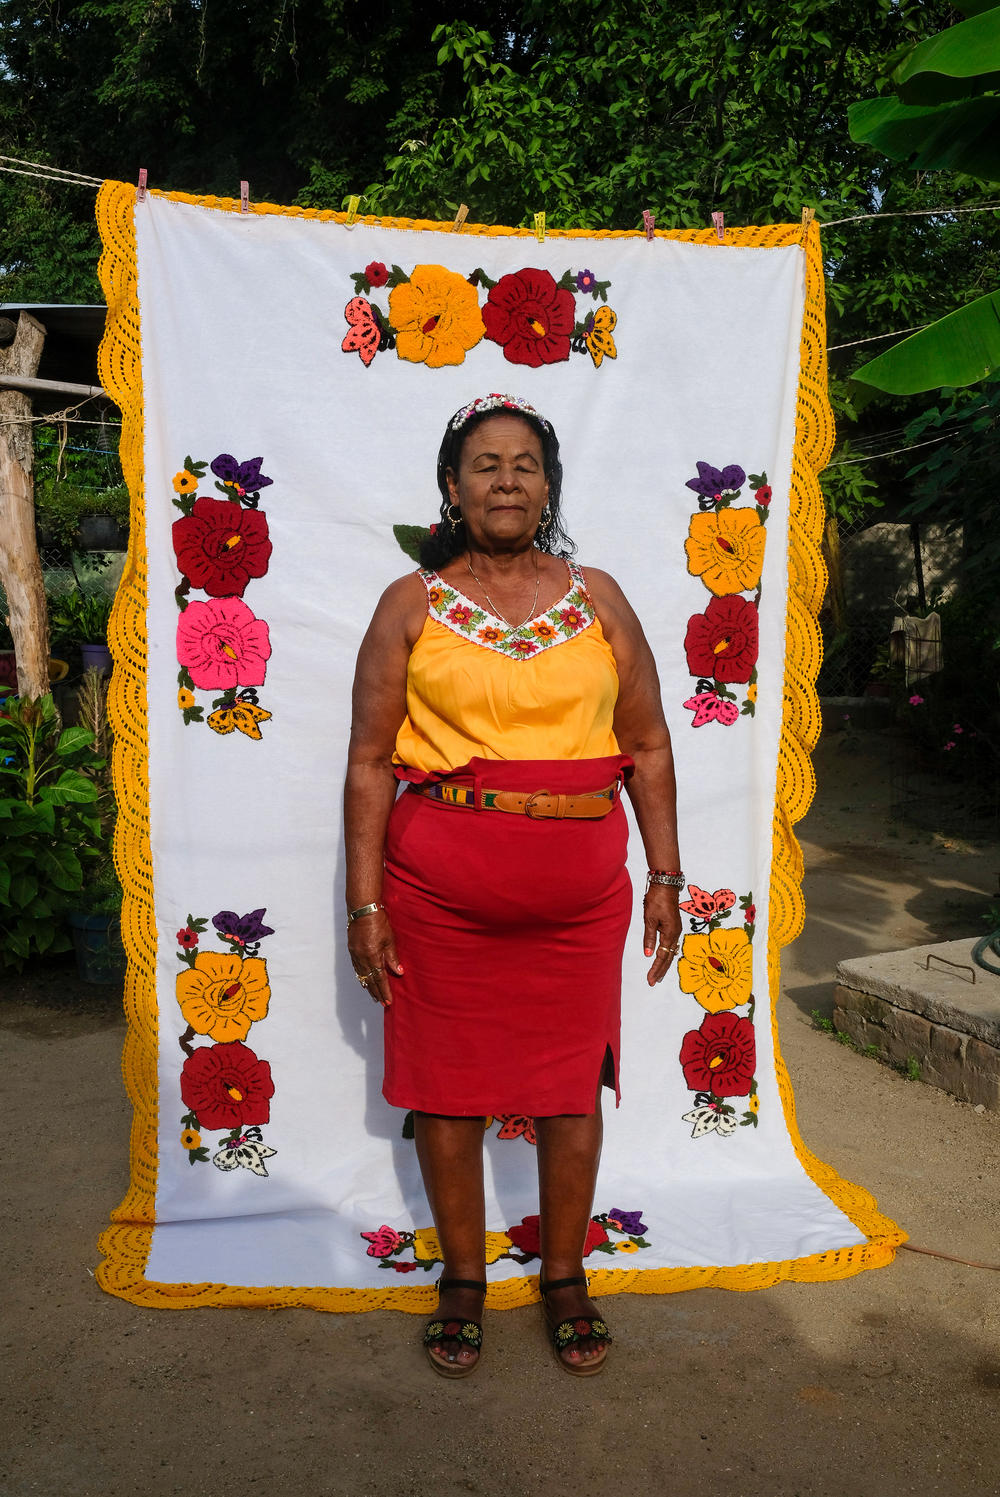 Tomasa Noyola, a leader in San Nicolás, in her garden on a background of one of the many textile handmade pieces crocheted by her.